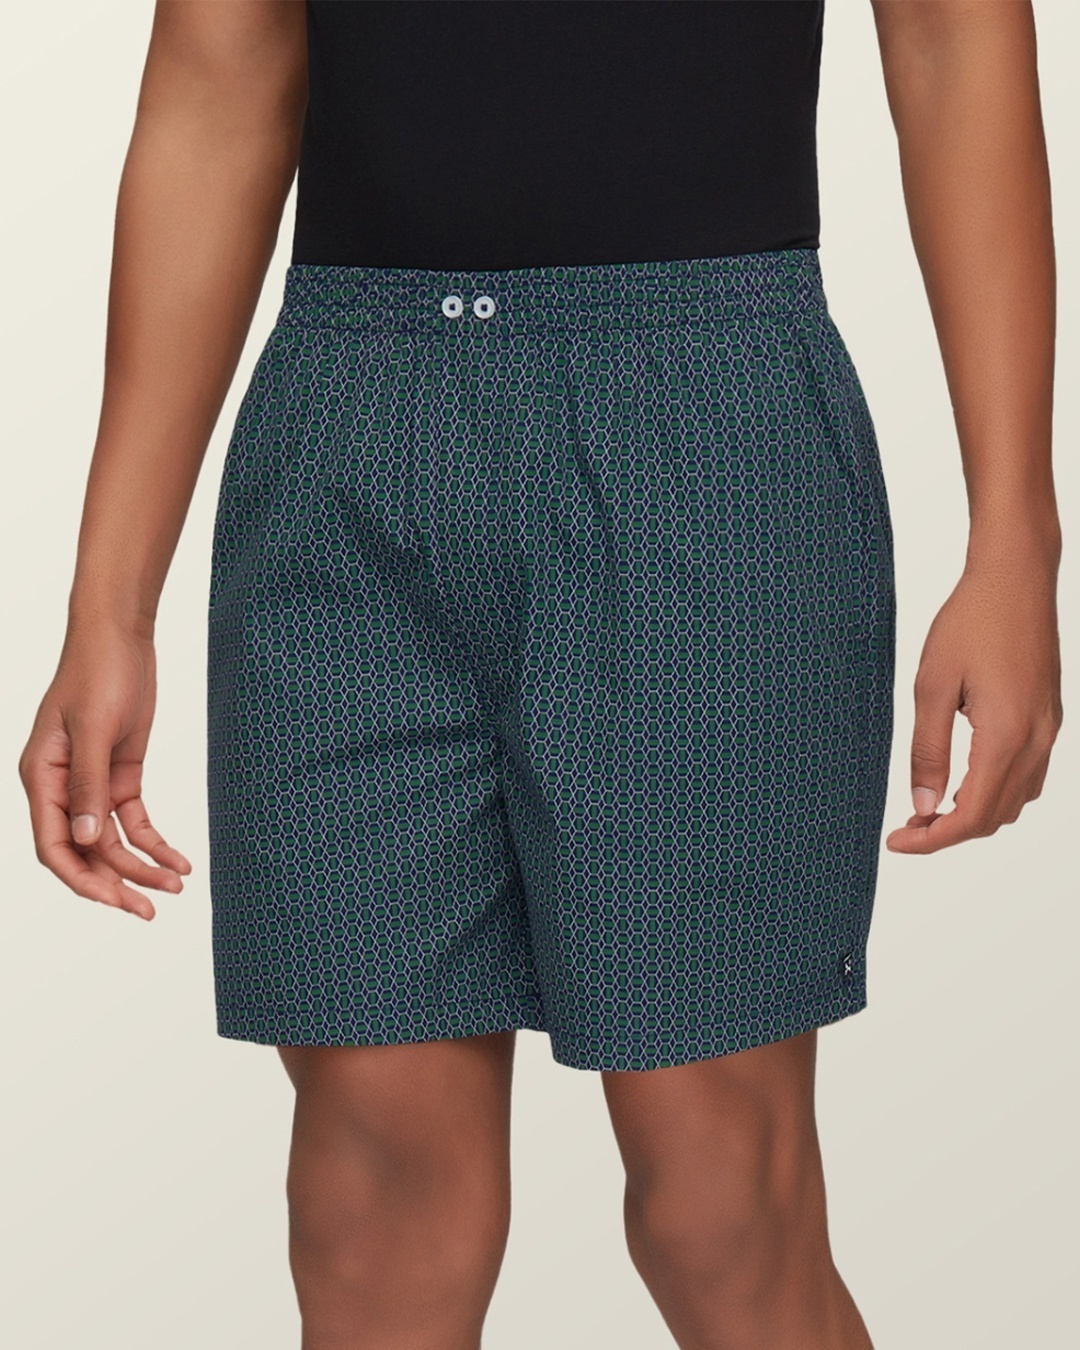 Shop Men's Blue & Green All Over Printed Cotton Boxers